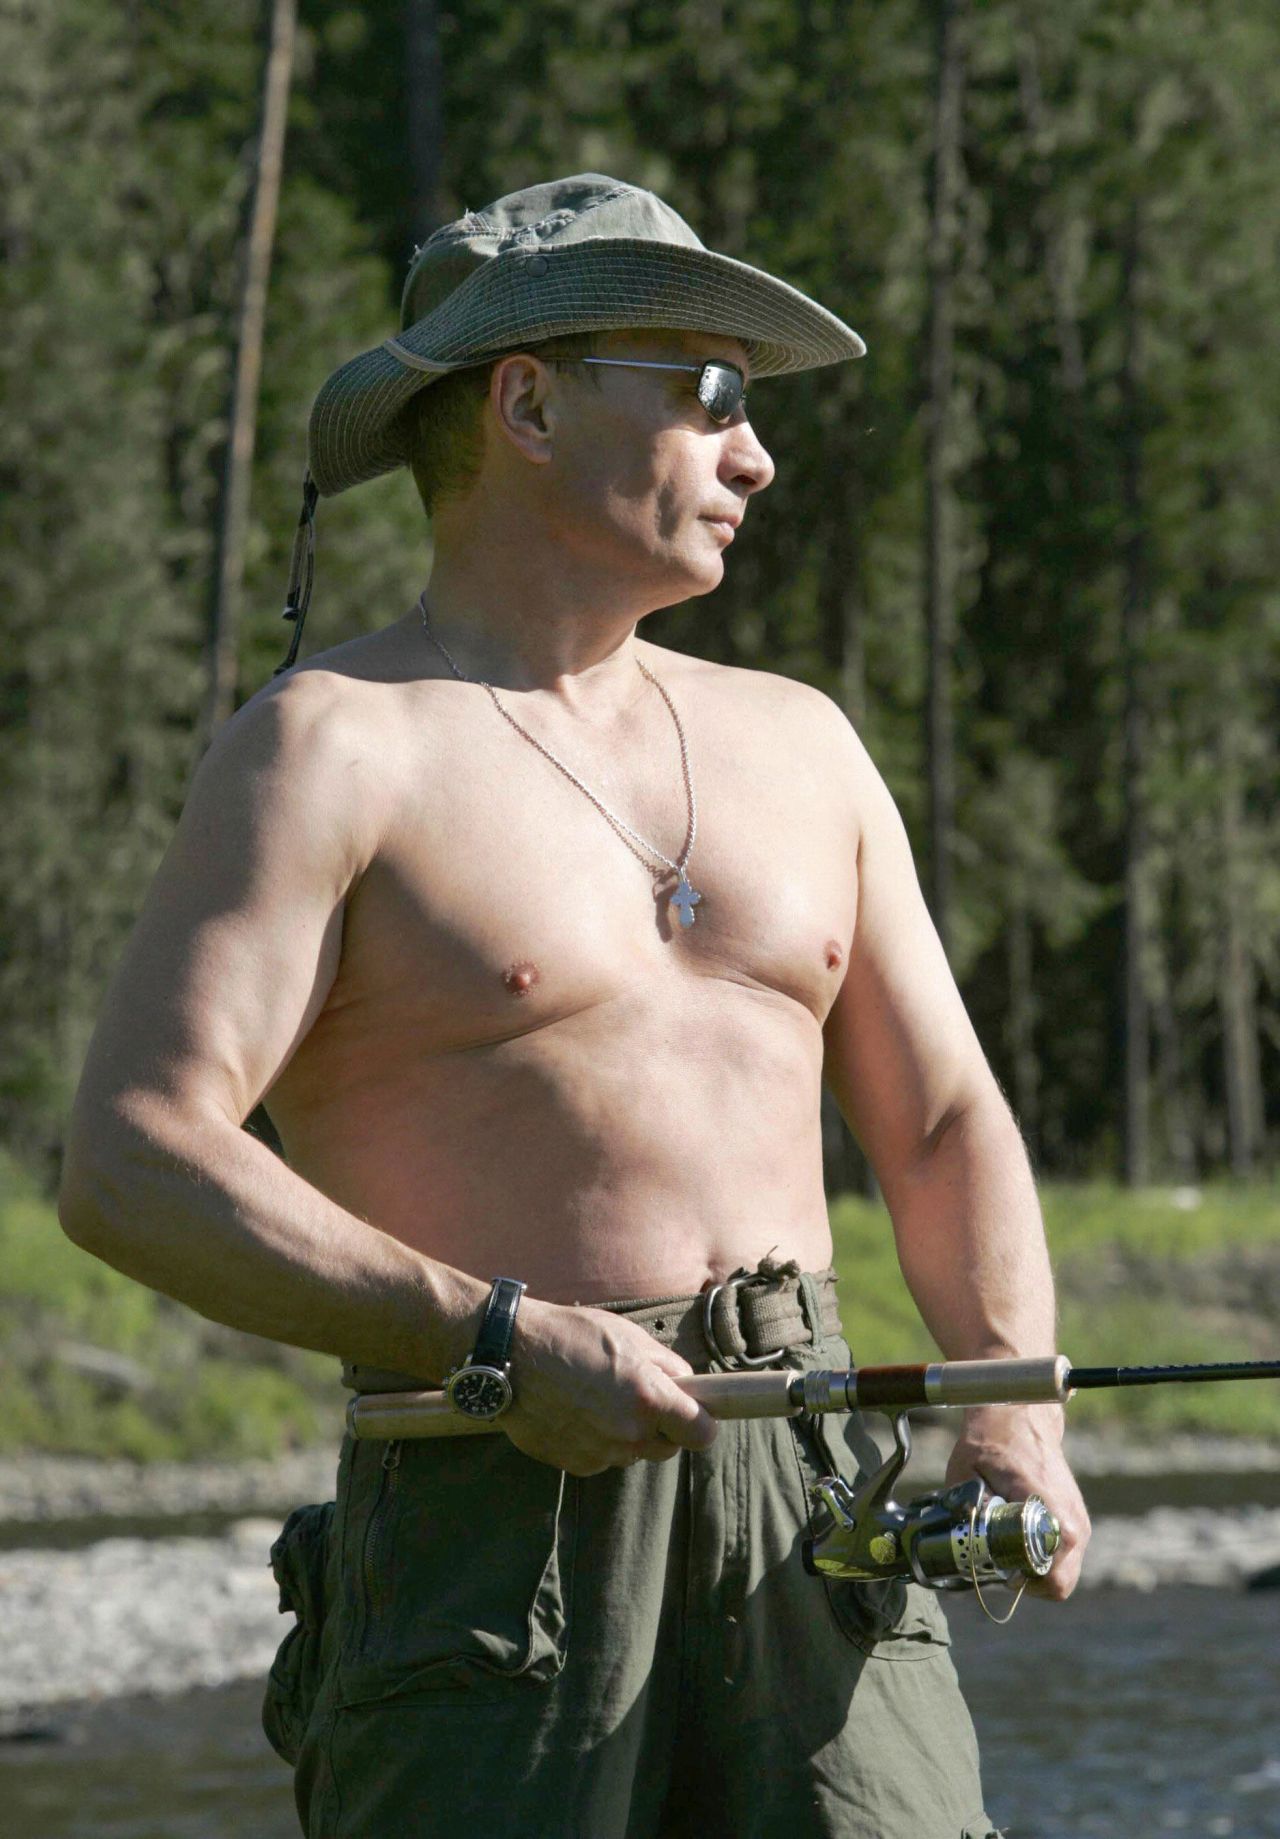 A shirtless Putin fishing in the headwaters of the Yenisei River in the Republic of Tuva on August 13, 2007.